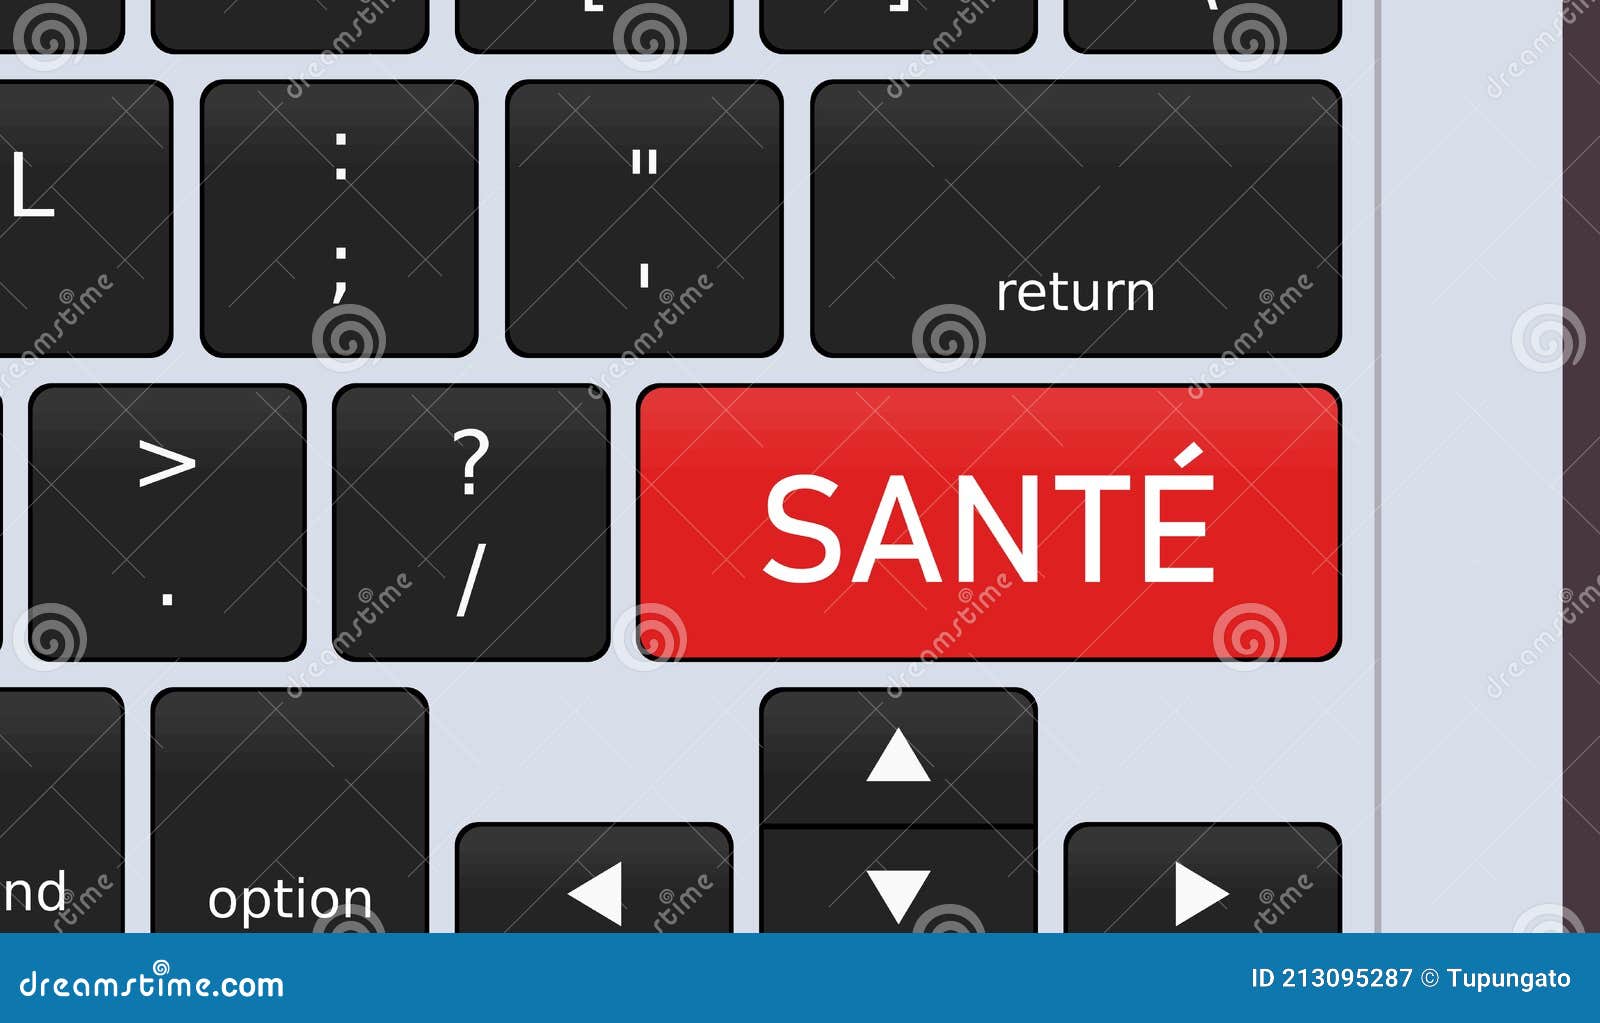 sante - health in french language